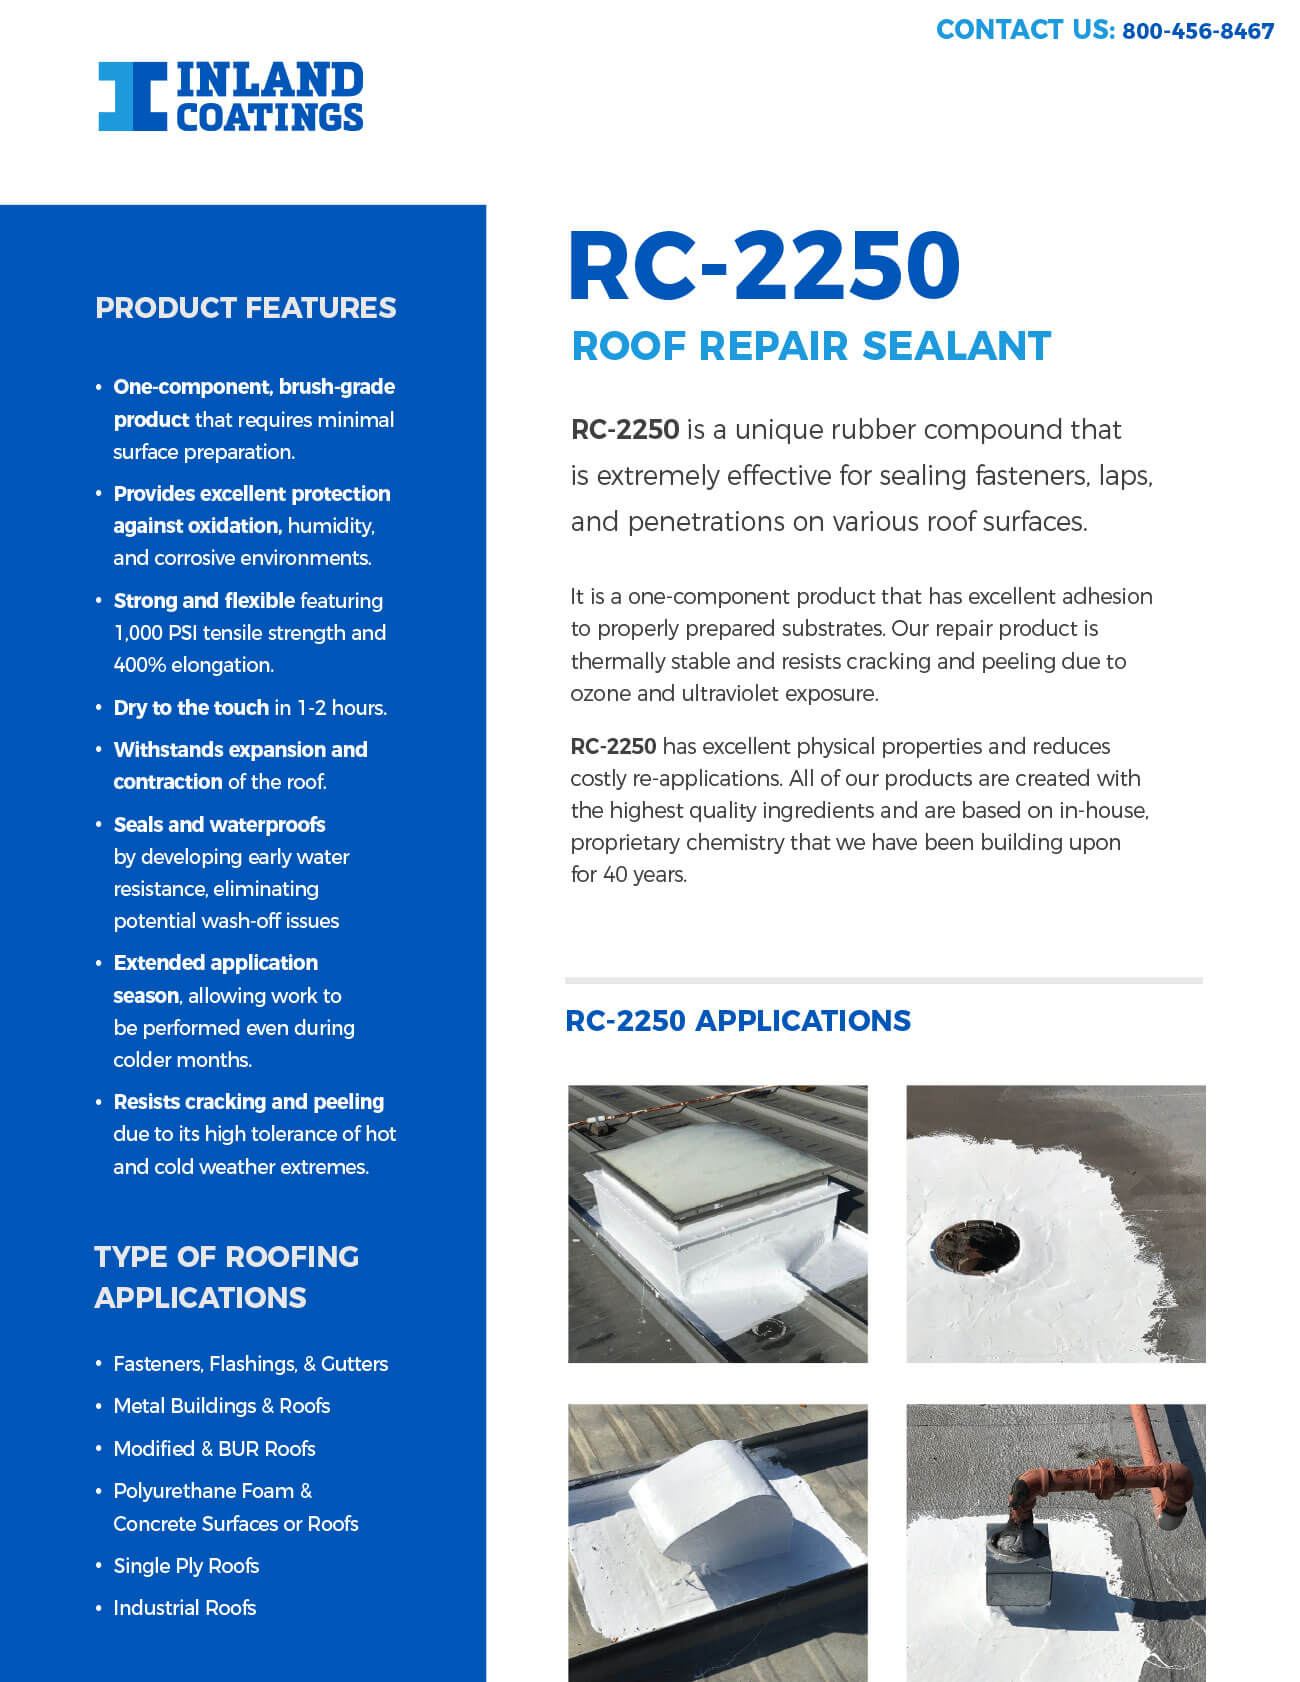 A photo preview of the Inland Coatings RC-2250 product brochure available upon request.